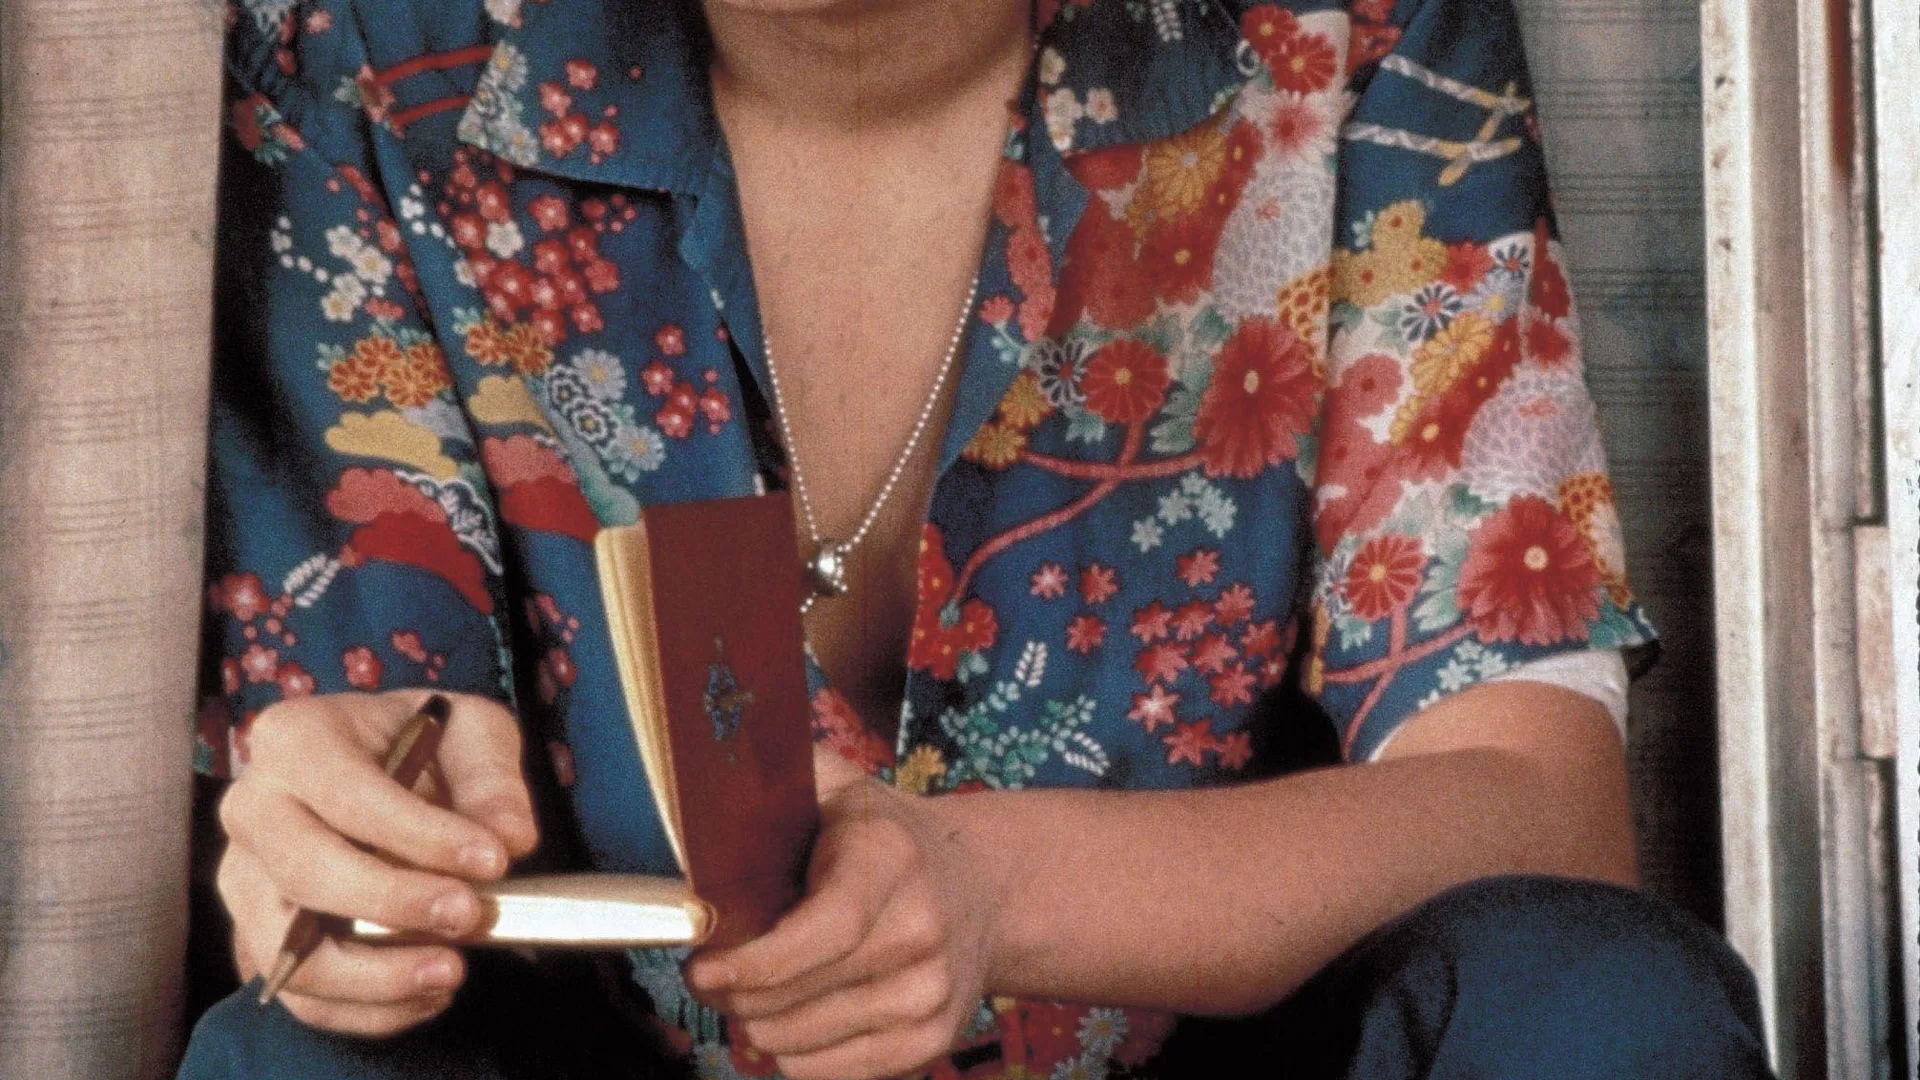 A photo of a man wearing a colourful hawaiian shirt holding a book and pen